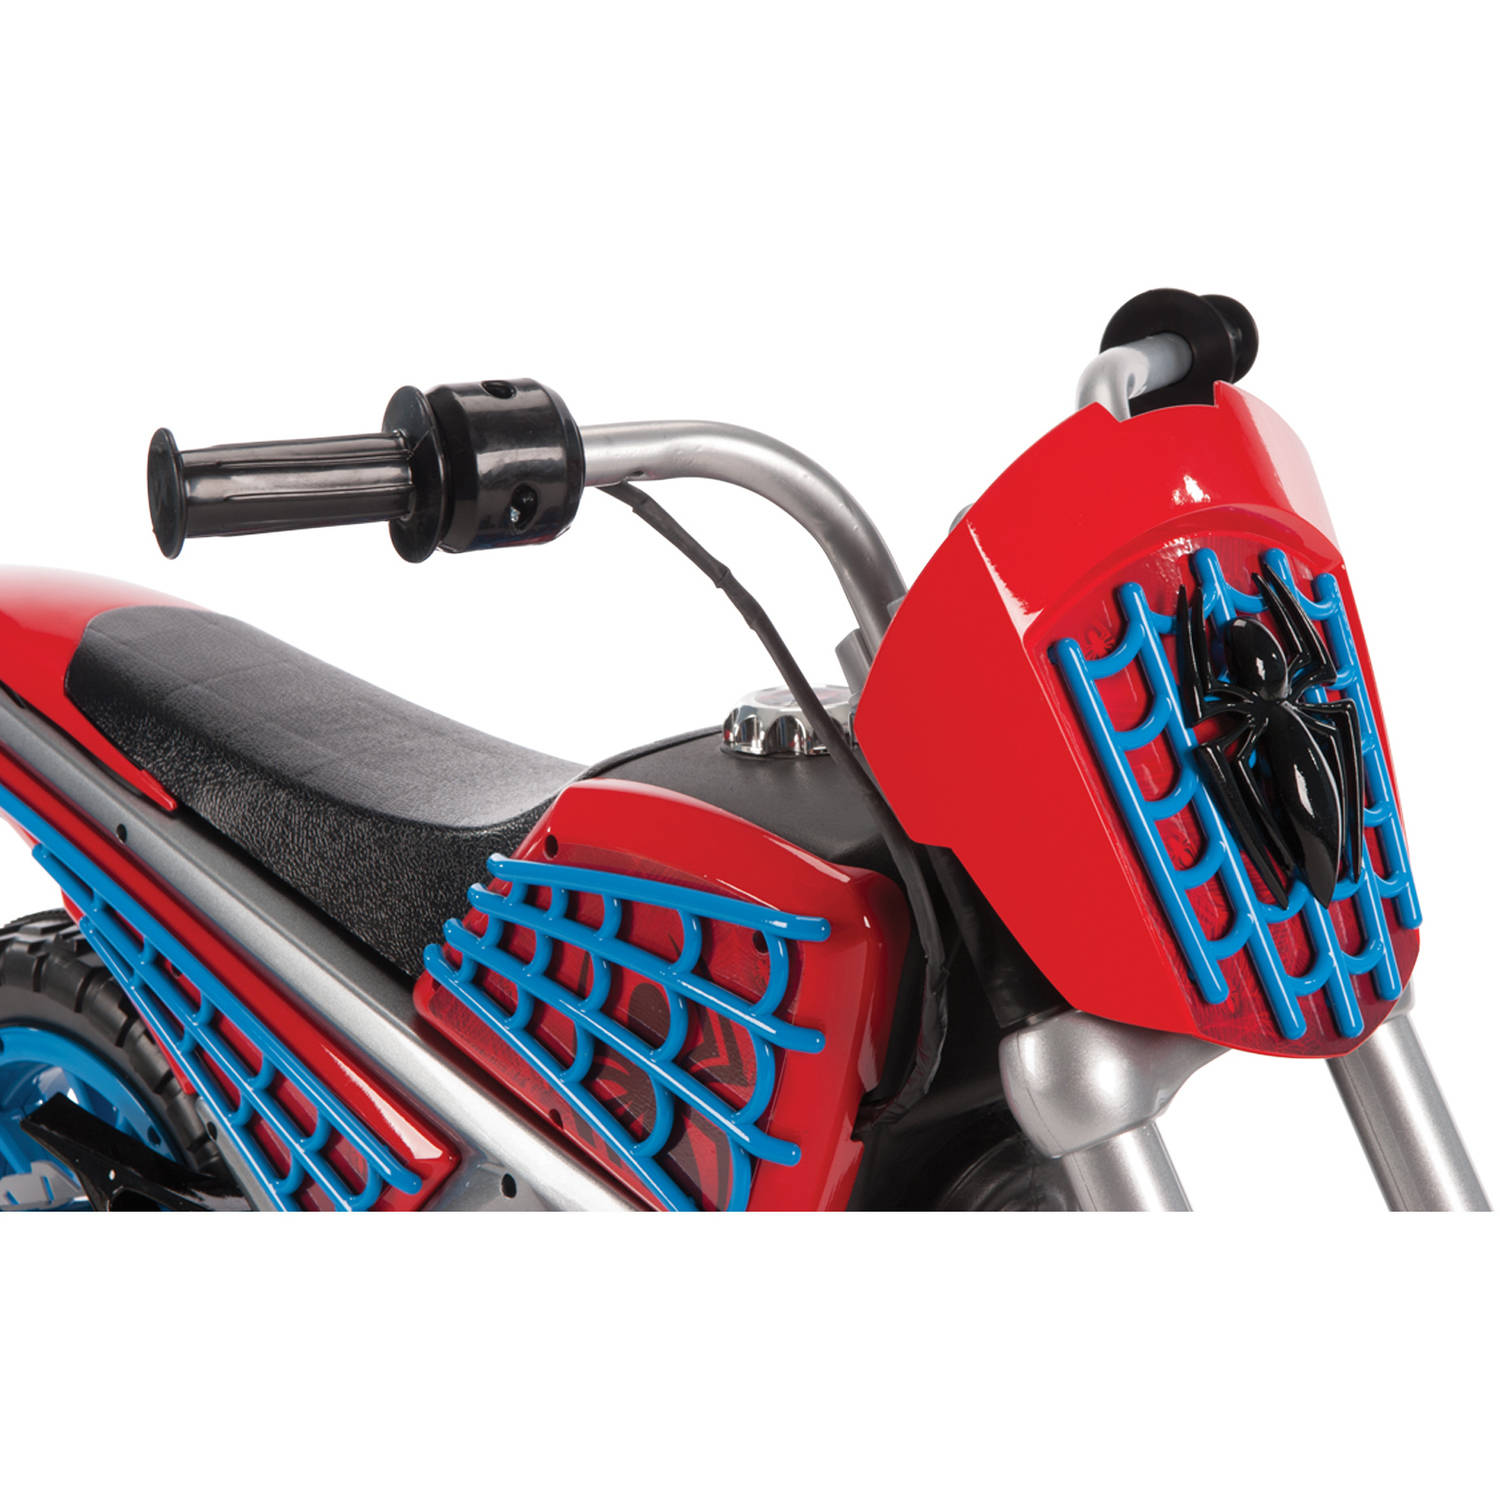 Marvel Spider-Man 6-Volt Electric Battery-Powered Ride On Toy by Huffy - image 3 of 4